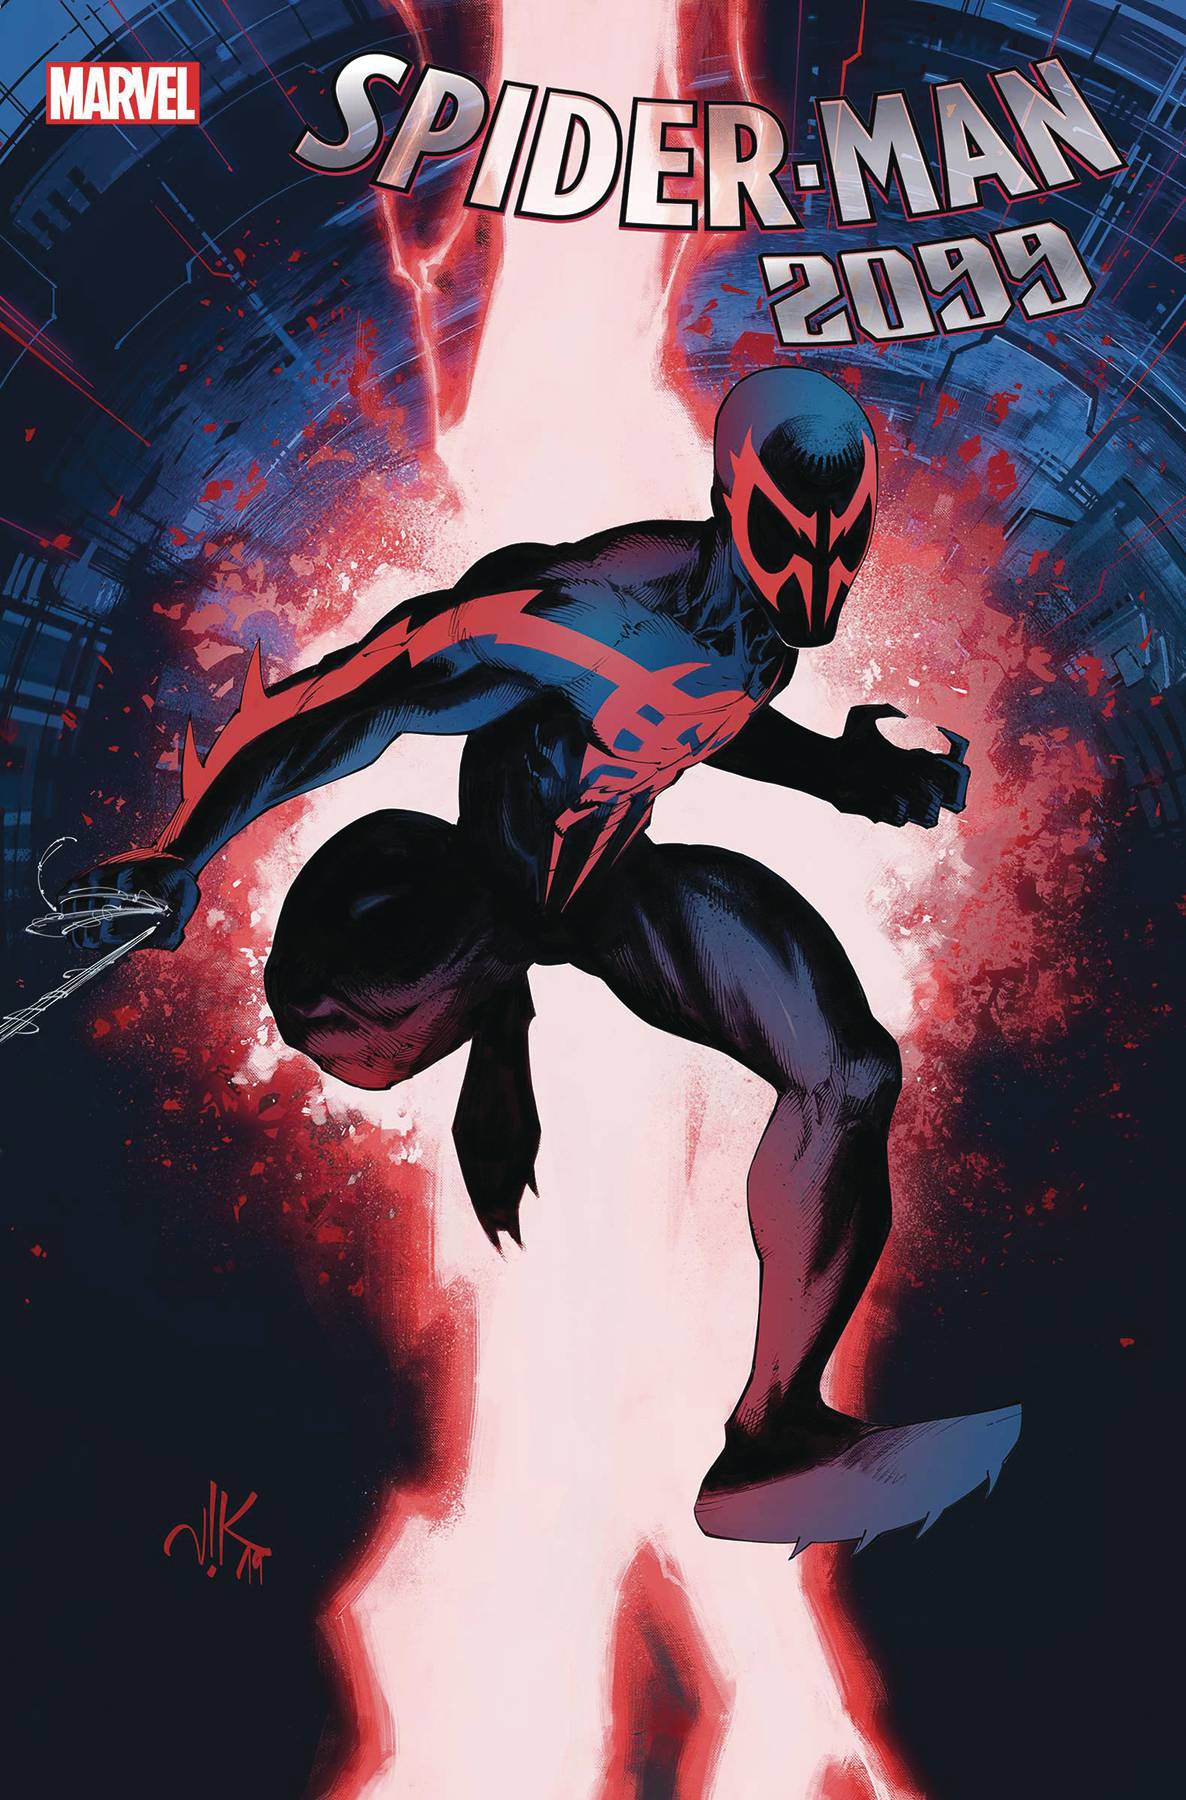 Spider-Man 2099 1 - Heroes Cave